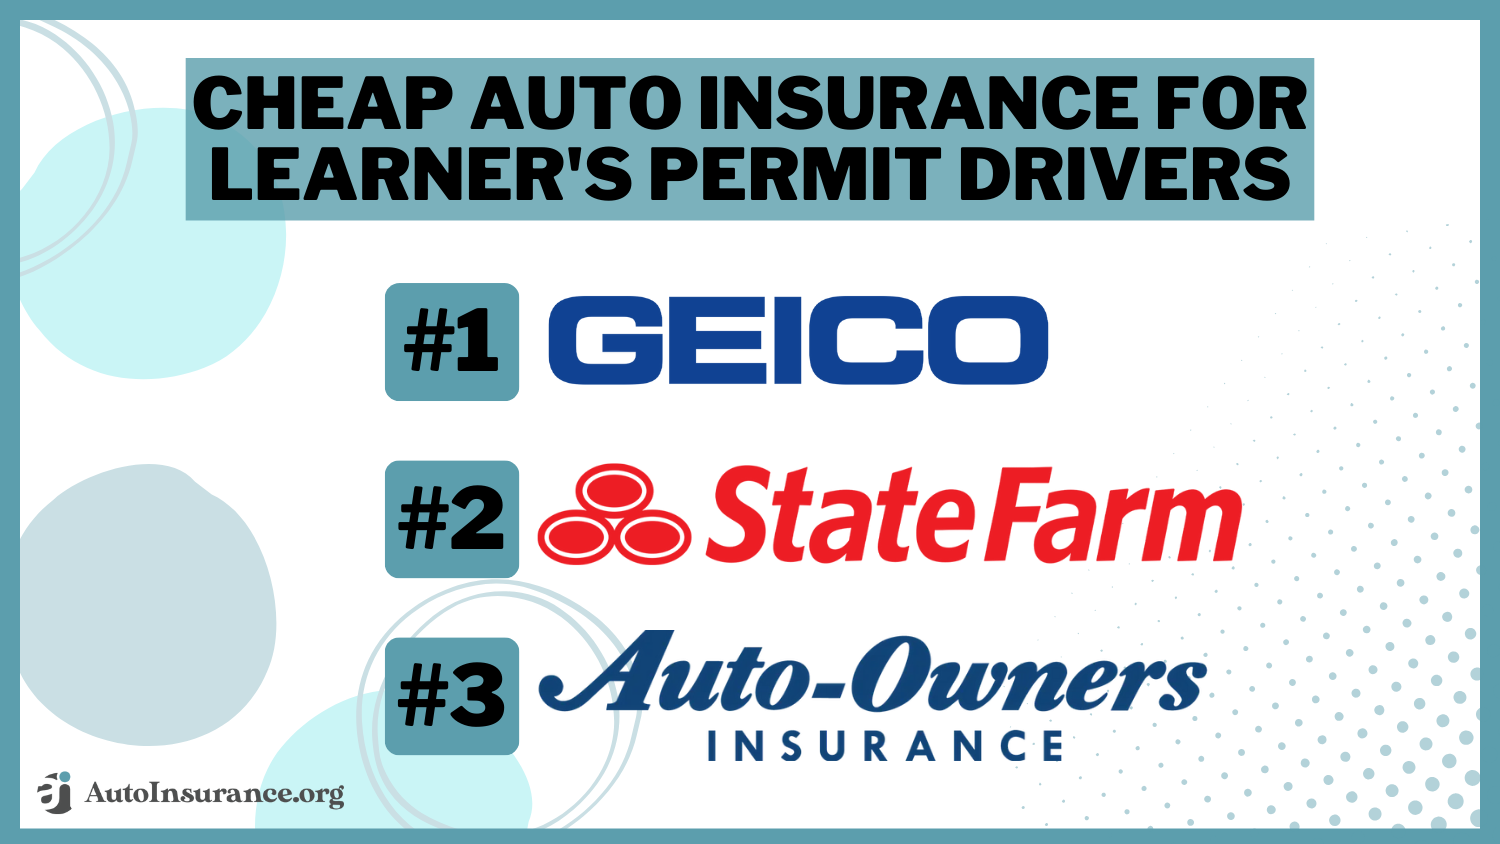 Geico state farm auto-owners cheap auto insurance for learner's permit drivers